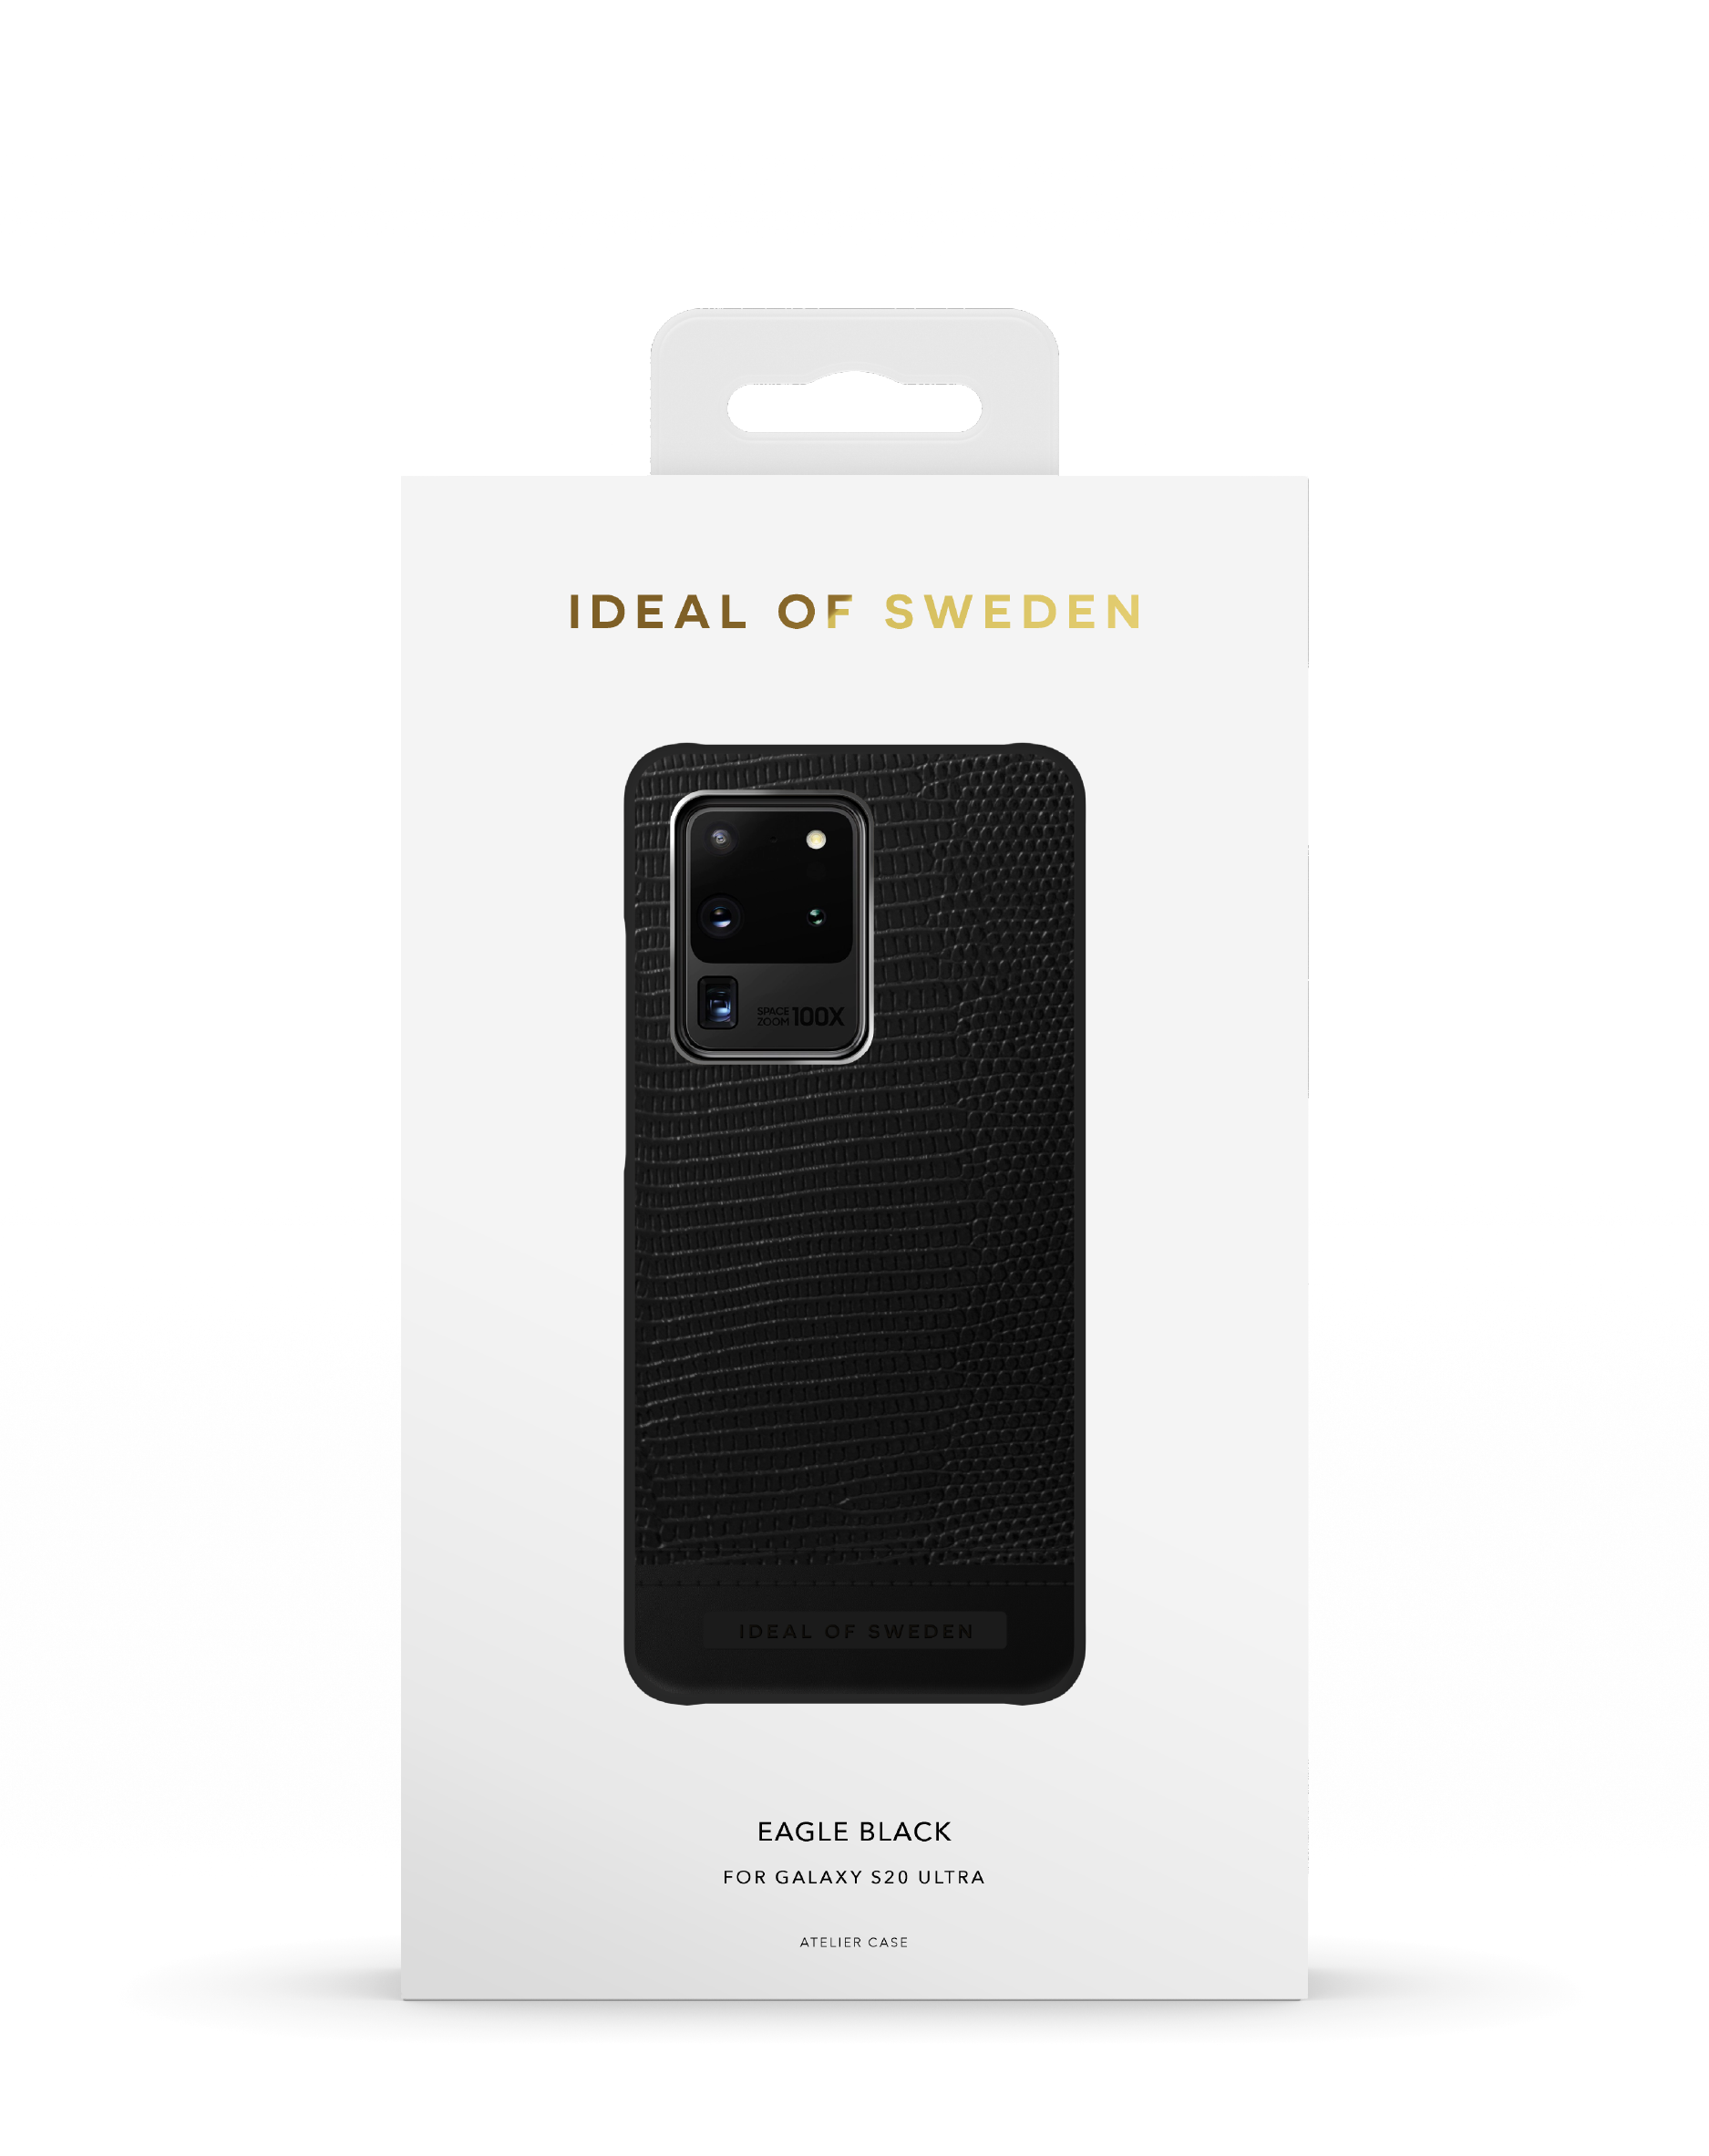 Full OF IDUWAW20-S11-229, IDEAL SWEDEN Black Cover, Galaxy Eagle S20+, Samsung,